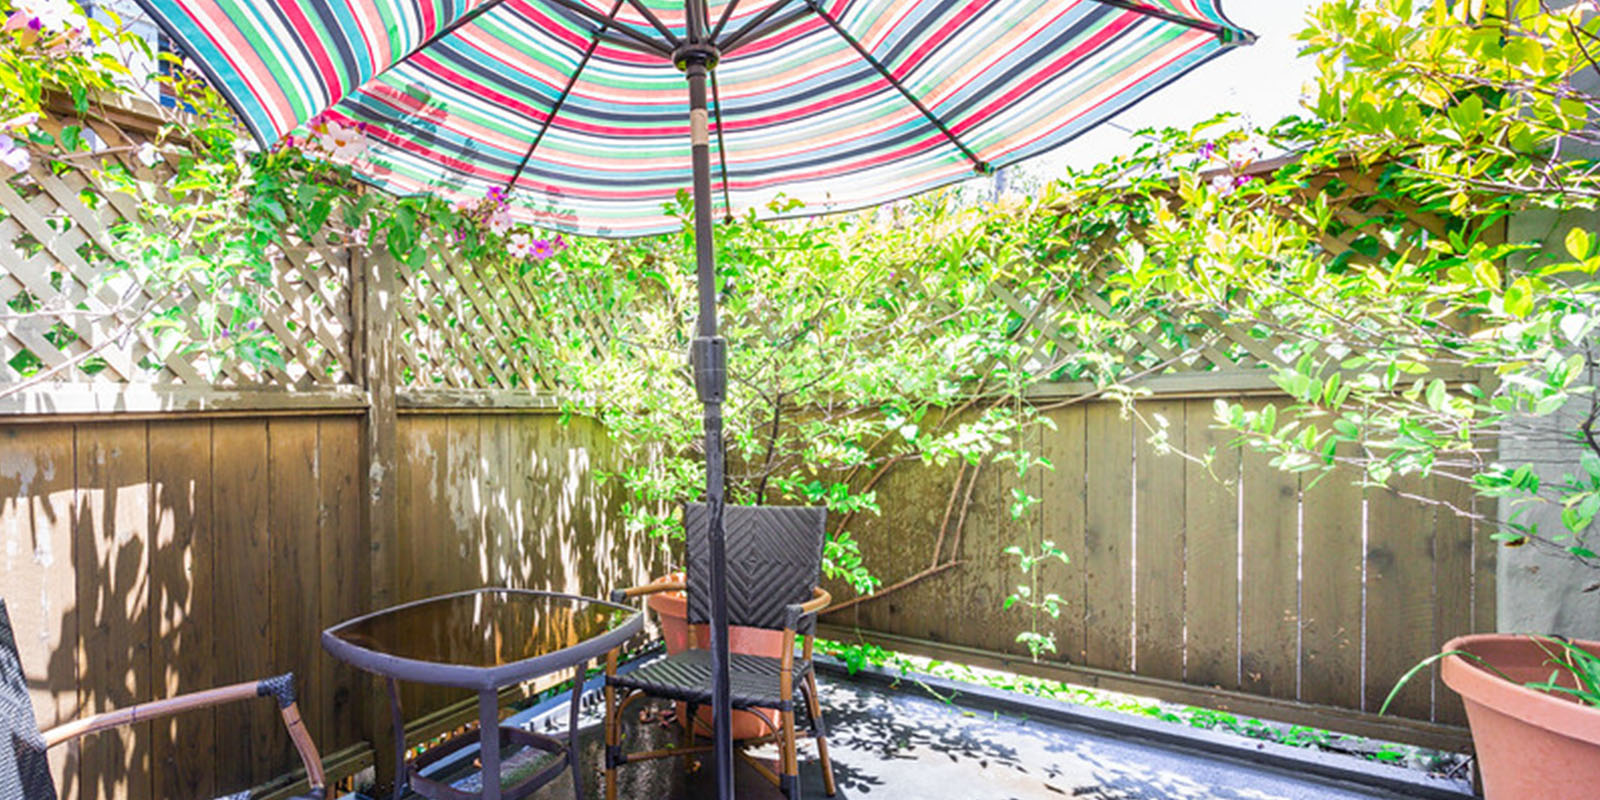 UNWIND AND ENJOY THE TRANQUIL SETTING OF A PRIVATE GARDEN PATIO